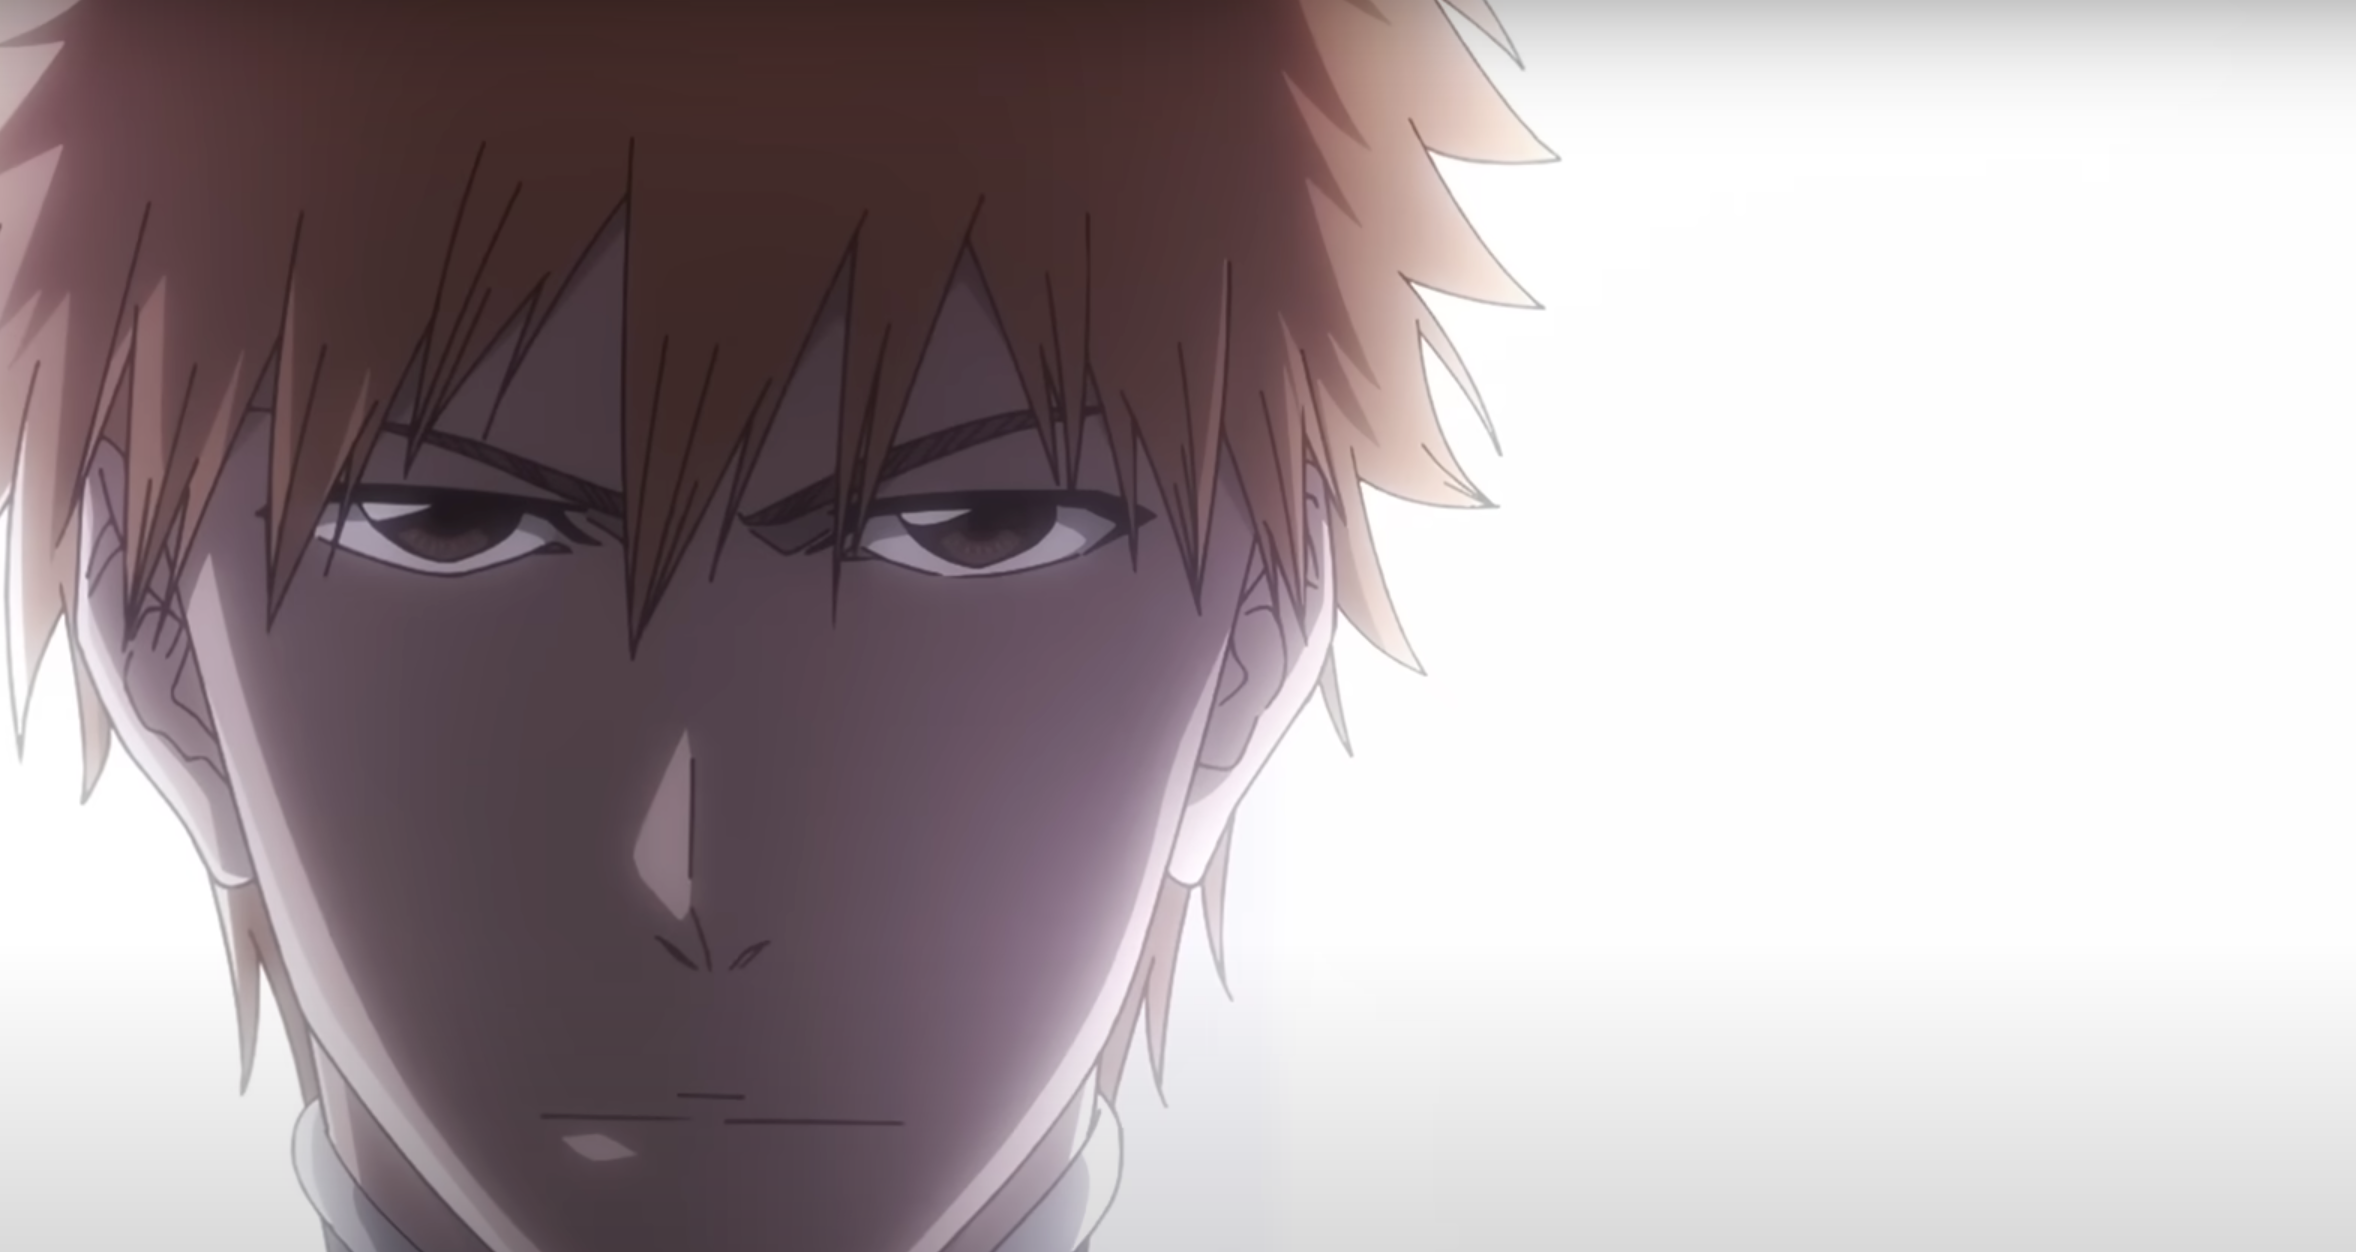 Bleach: Thousand Year Blood War' Episode 3 free live stream: How to watch  online without cable 